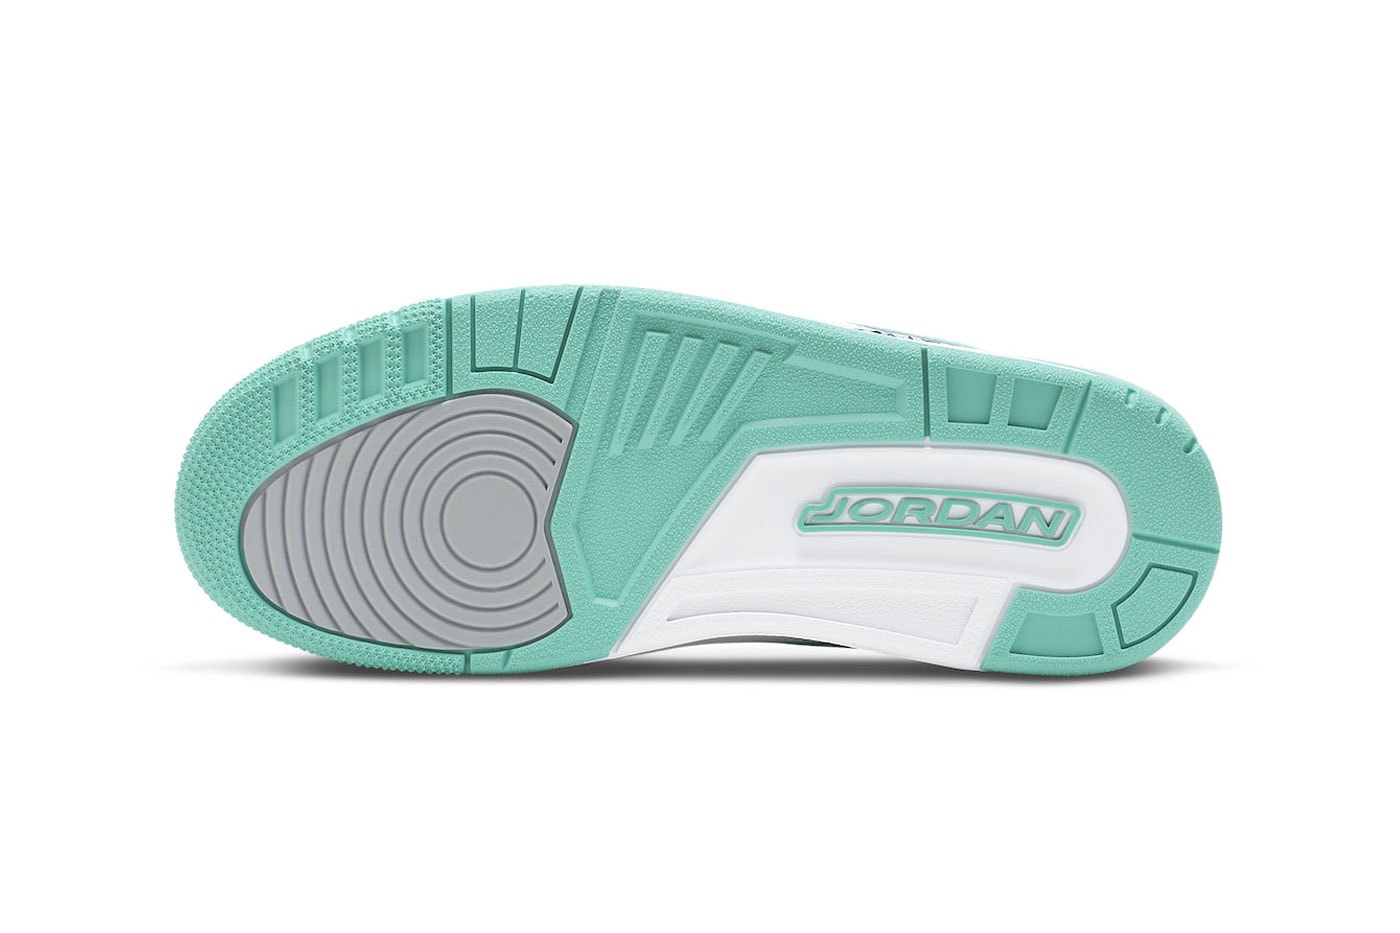 The Air Jordan Legacy 312 Low "Turquoise" Receives a Luxe Tiffany-like Colorway for the Summer white turquoise CD7069-130 nike jordan brand michael jordan